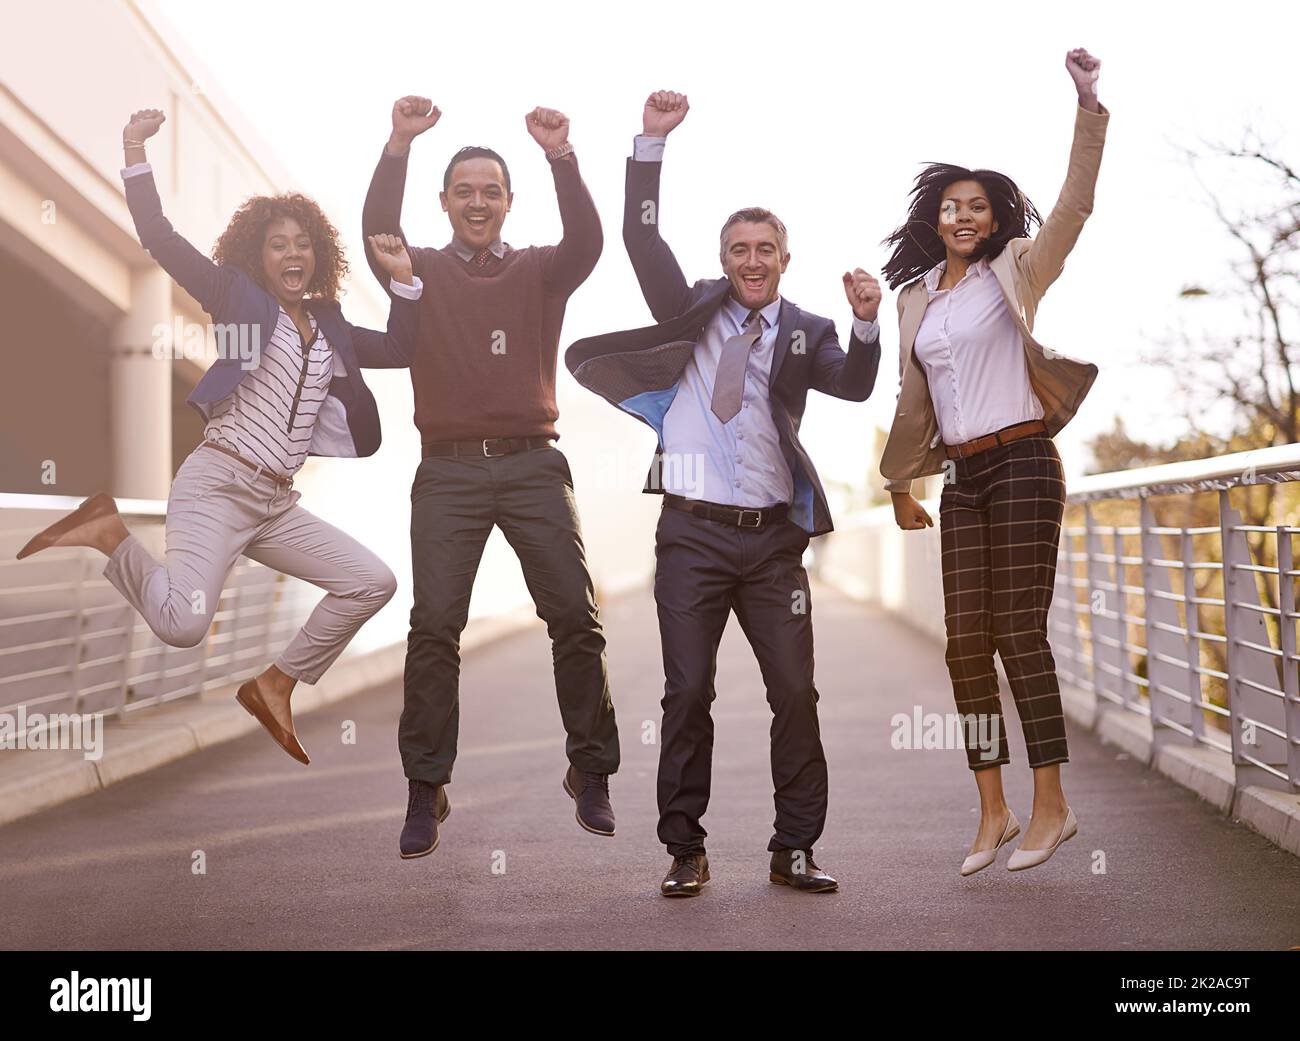 The triumphant team. A group of businesspeople jumping with excitement outside. Stock Photo